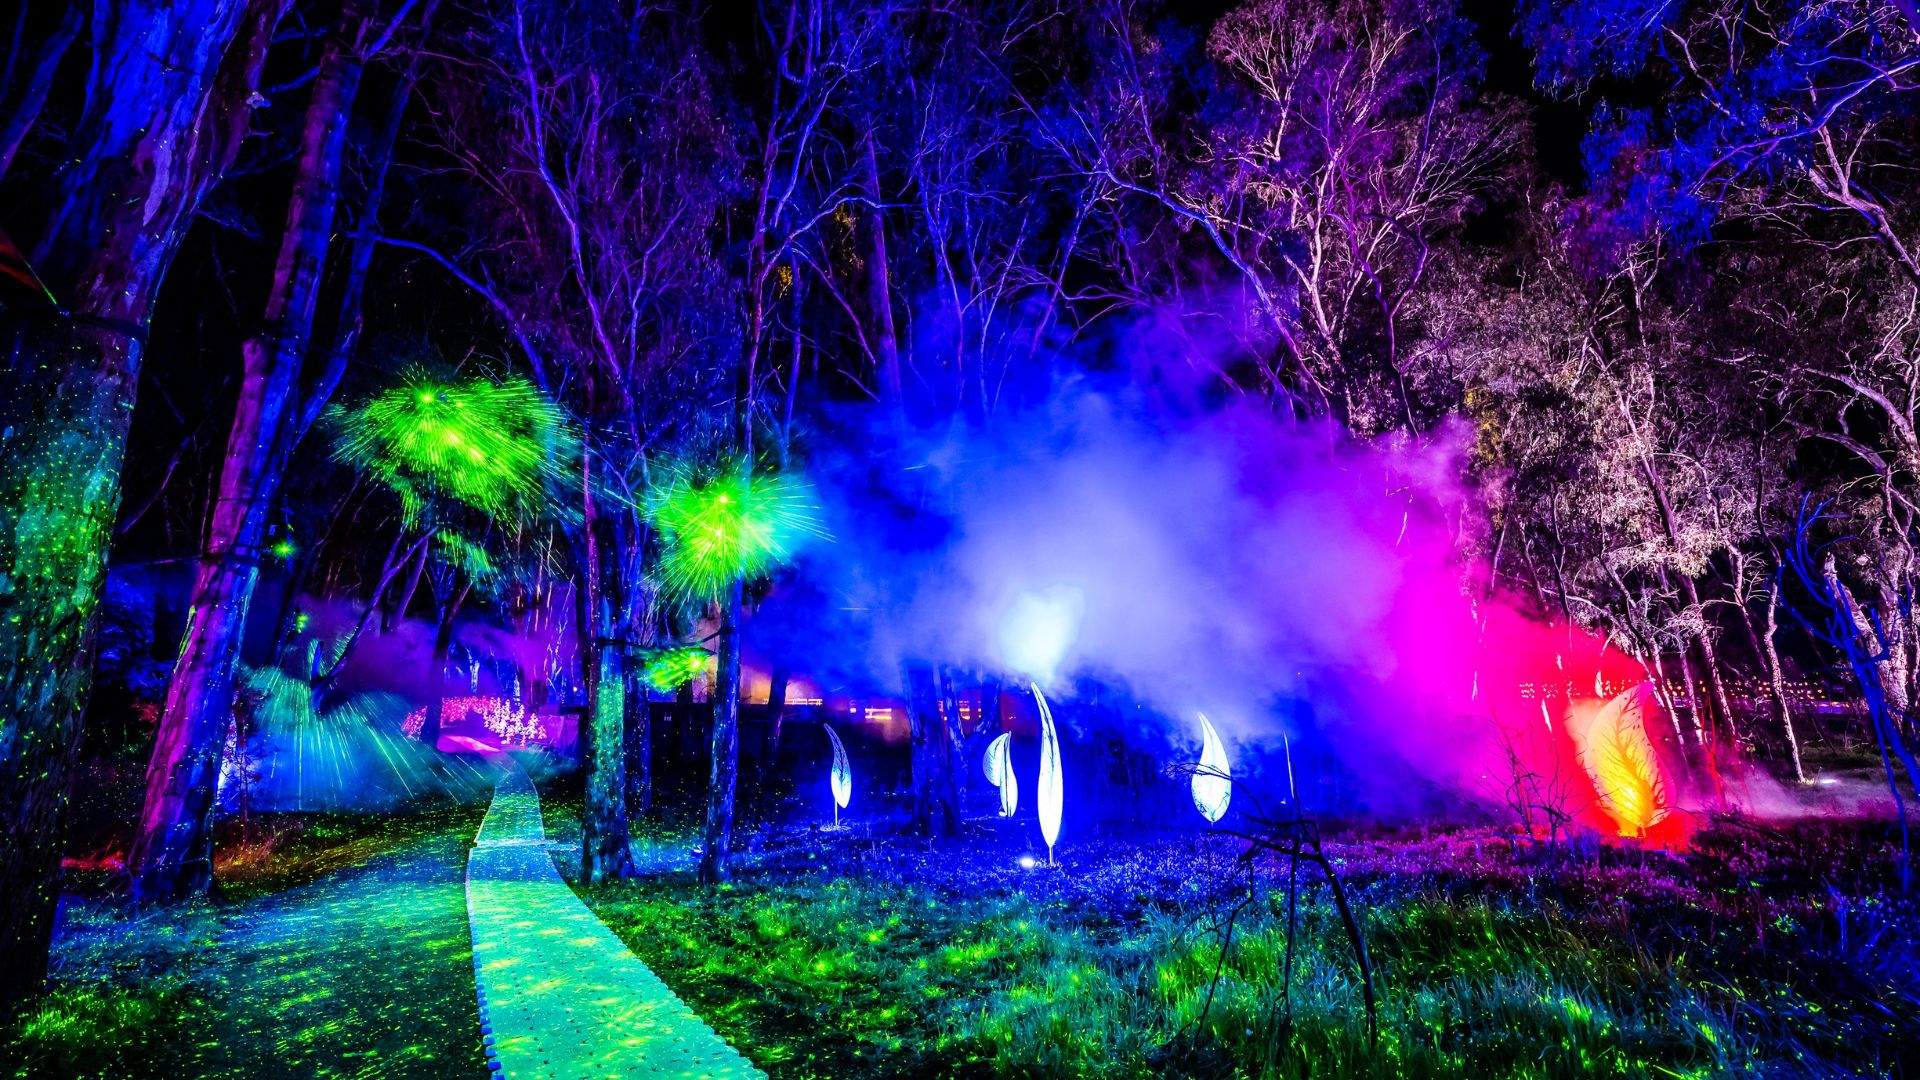 Regional Arts Festival Moama Lights Is Returning for 2023 to Illuminate the Murray River